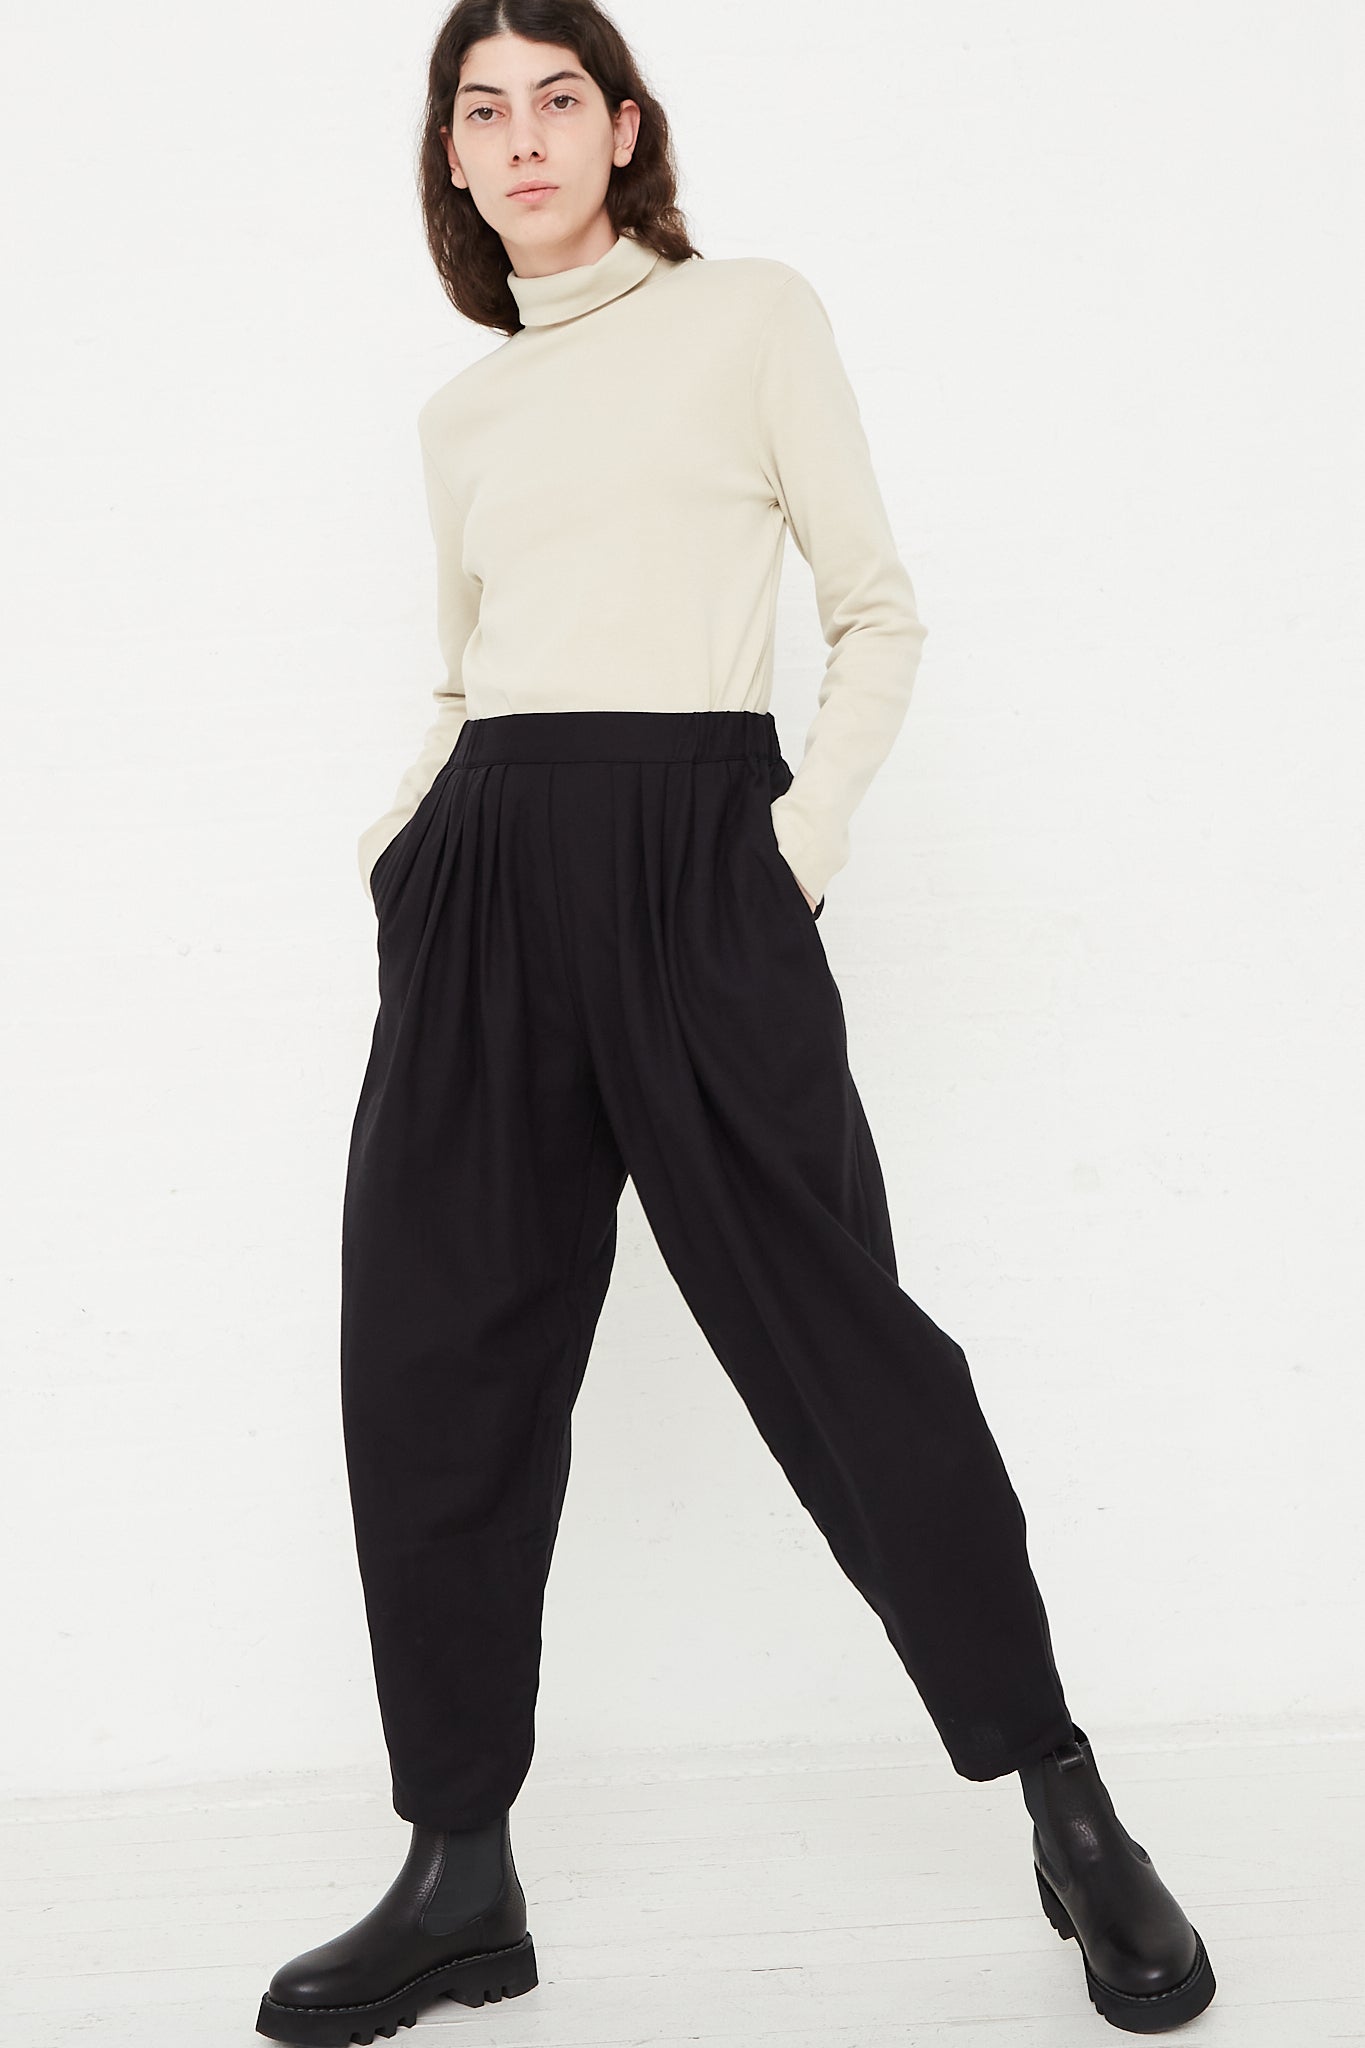 Cotton Twill Draped Pants in Black by Black Crane for Oroboro Front